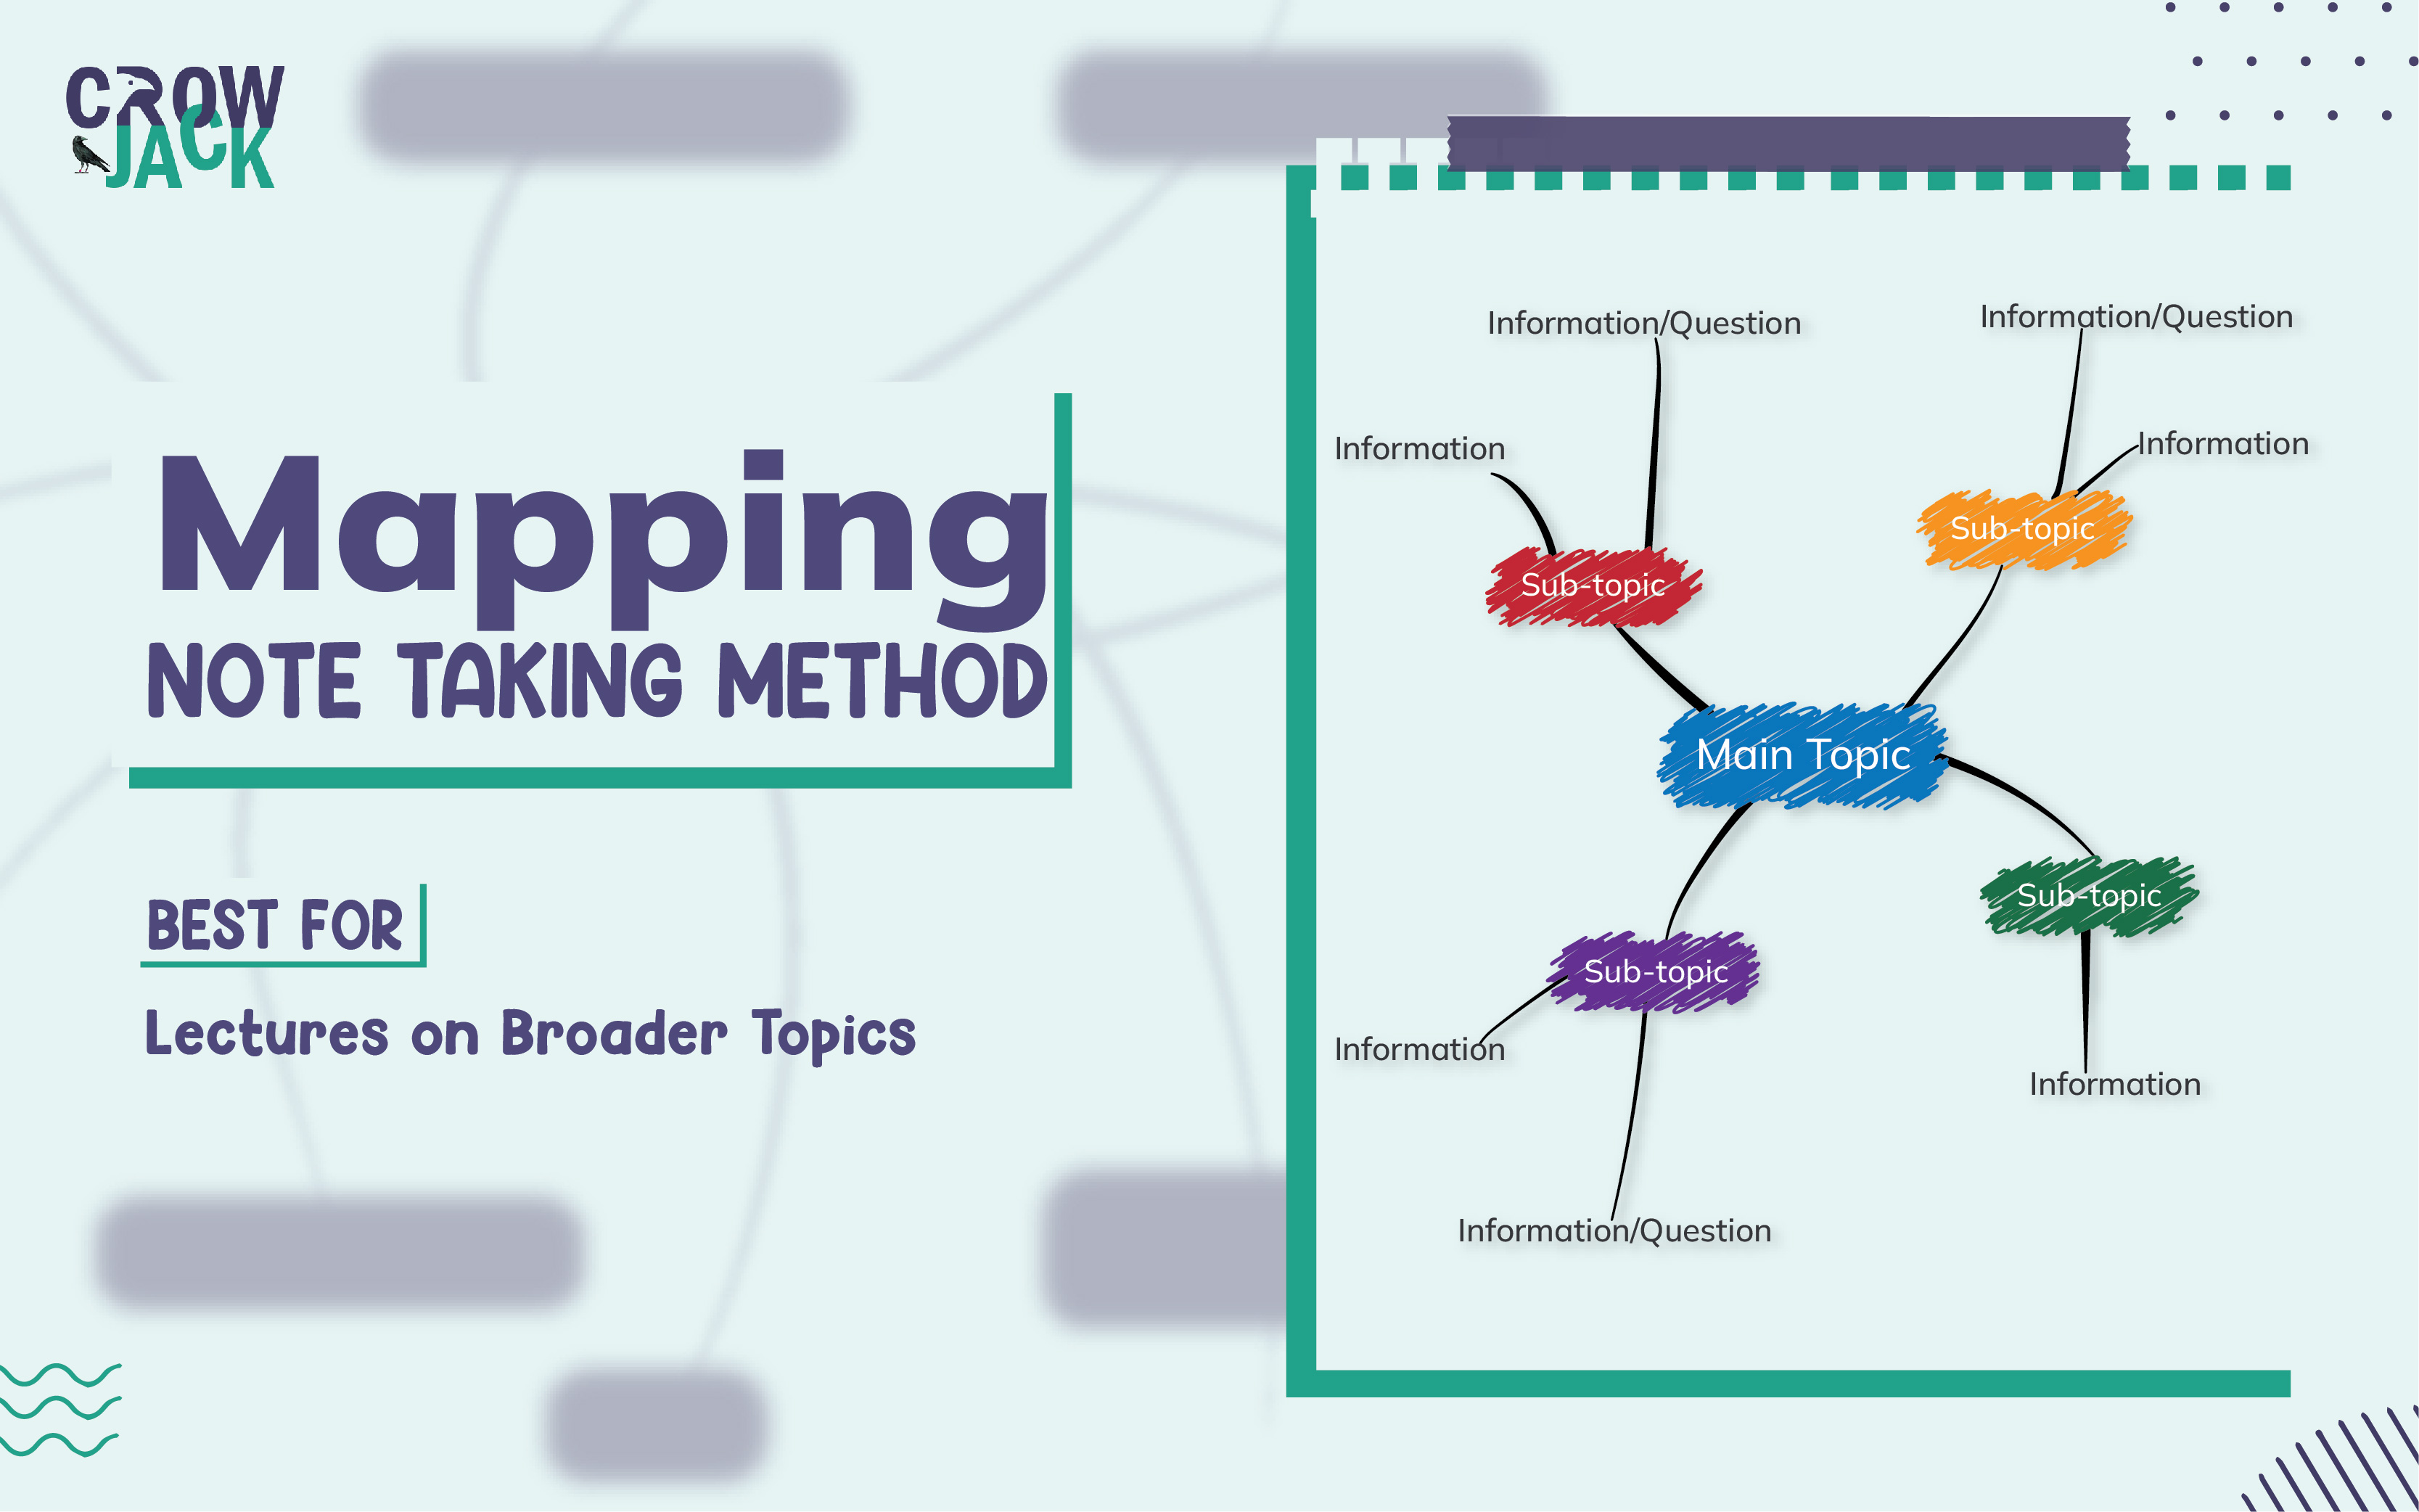 When to use the mind mapping method for note taking